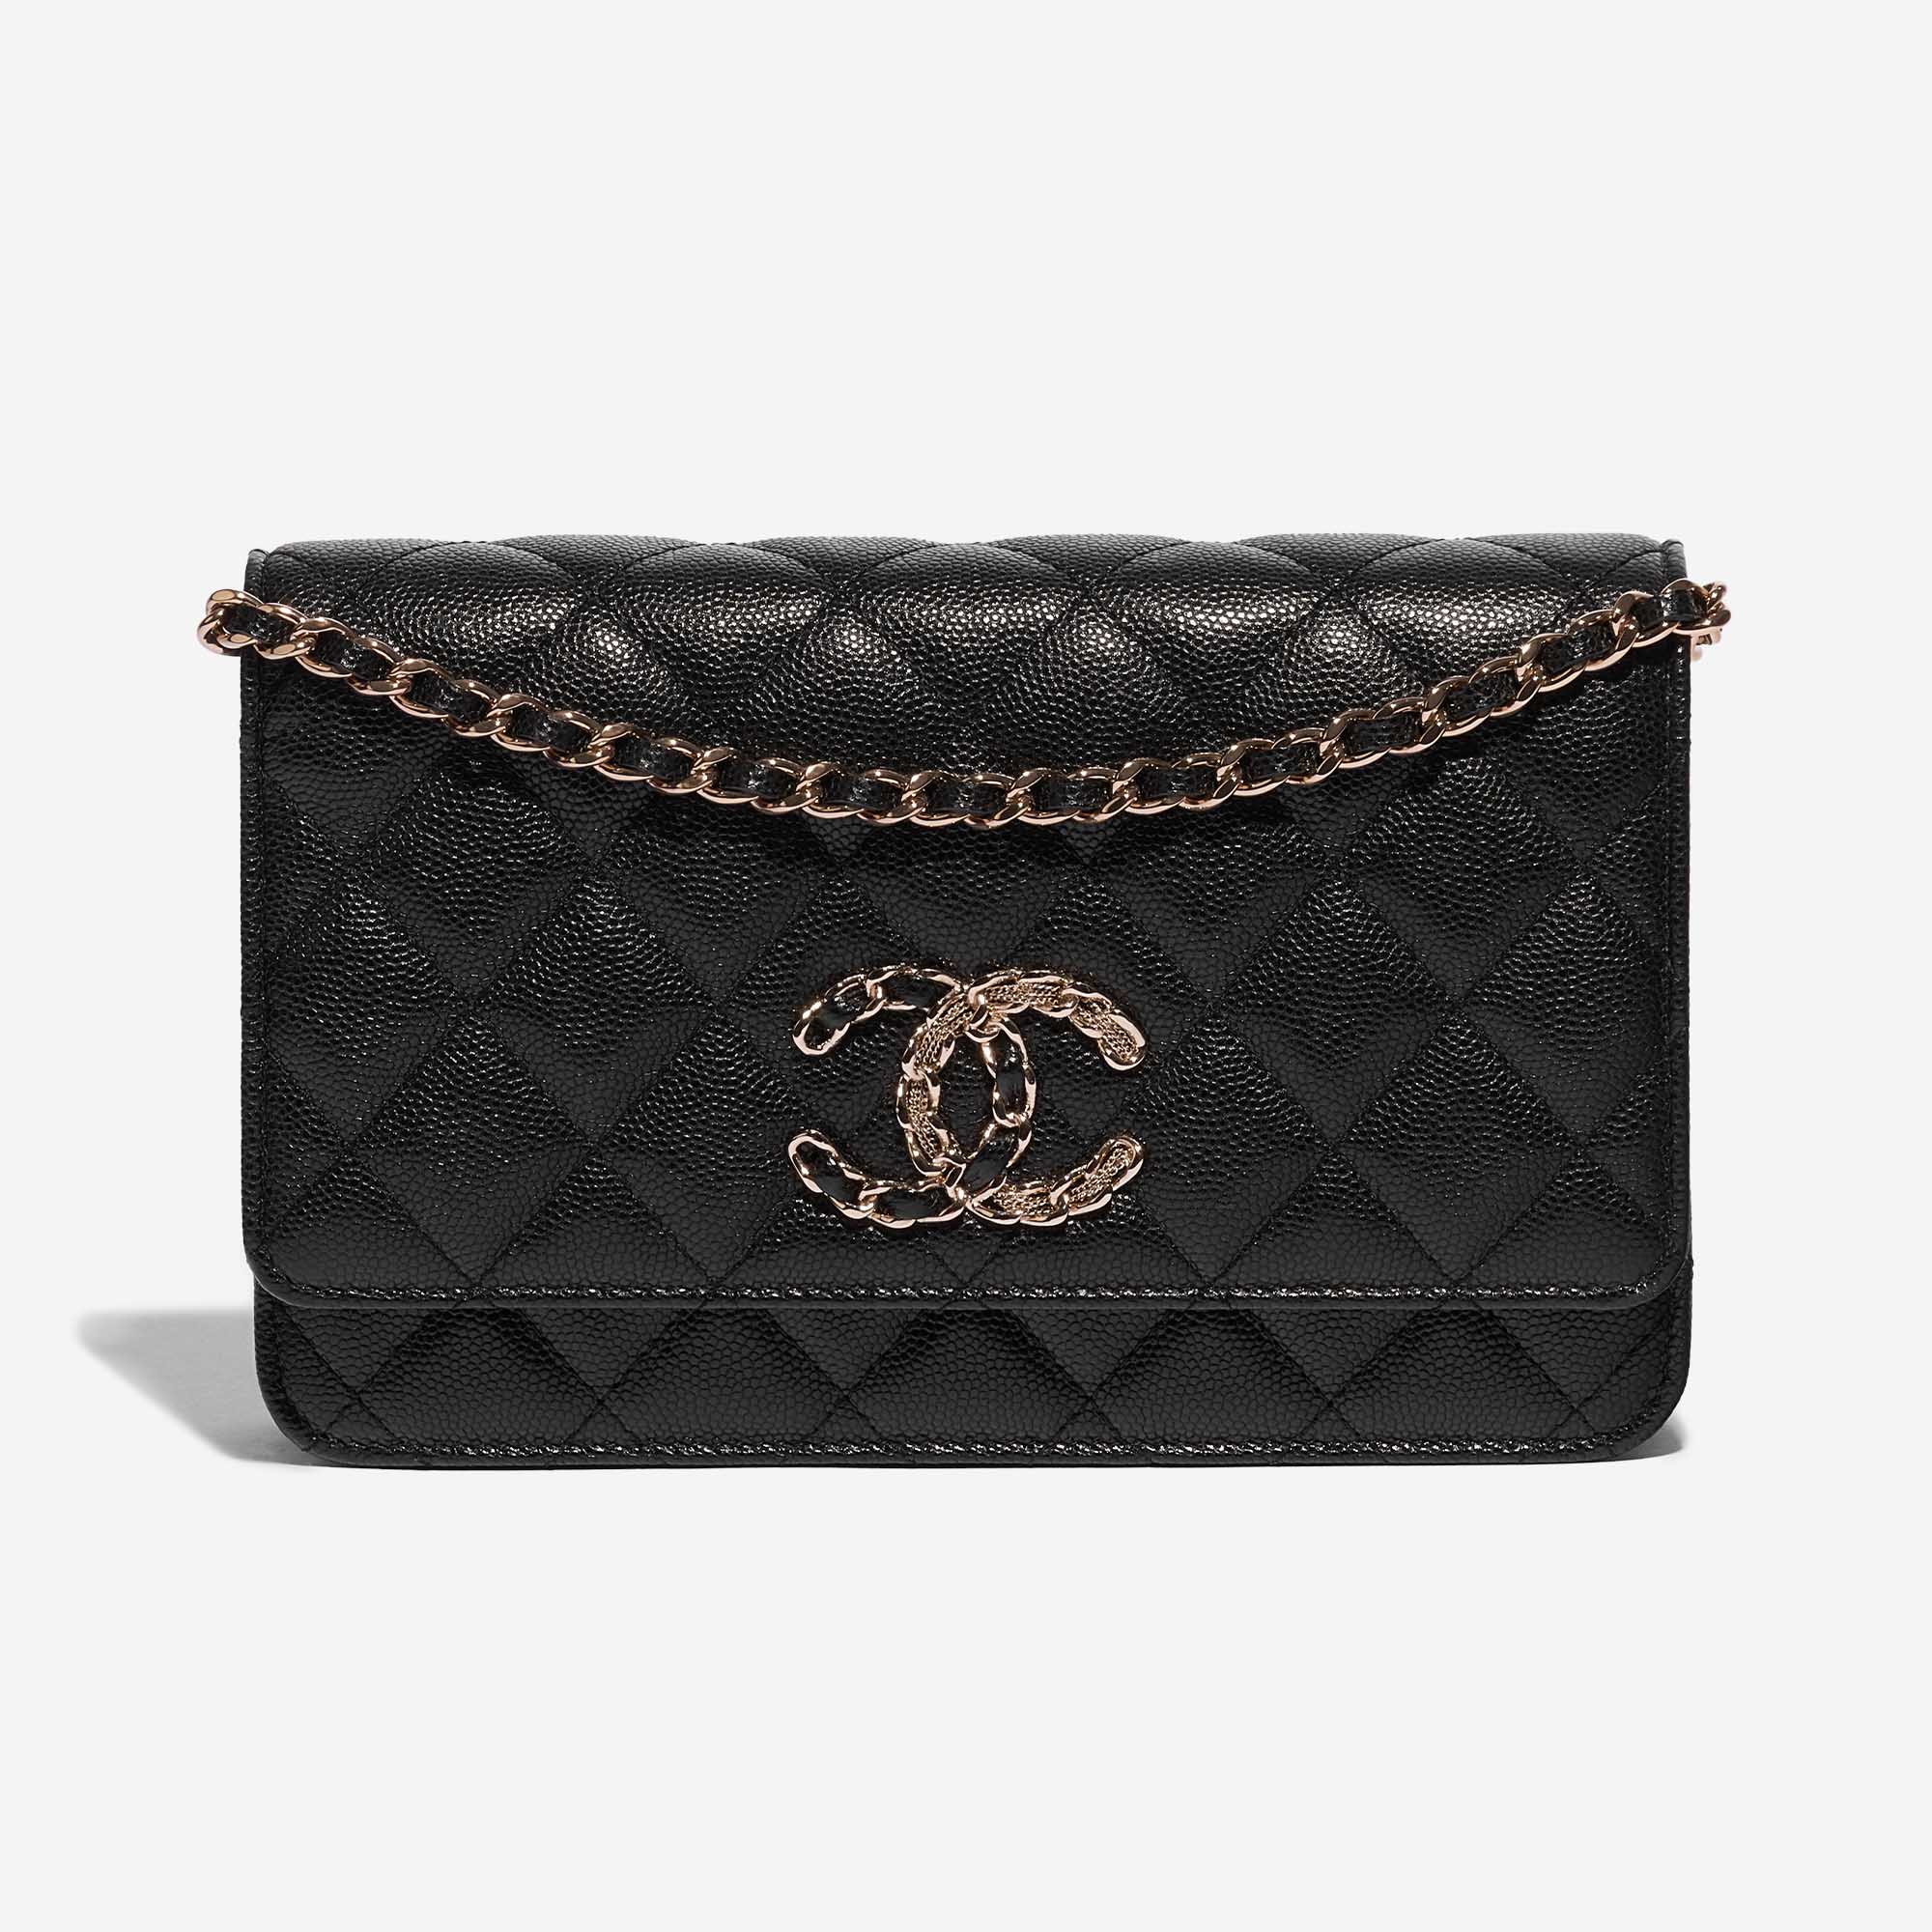 leather chanel purse